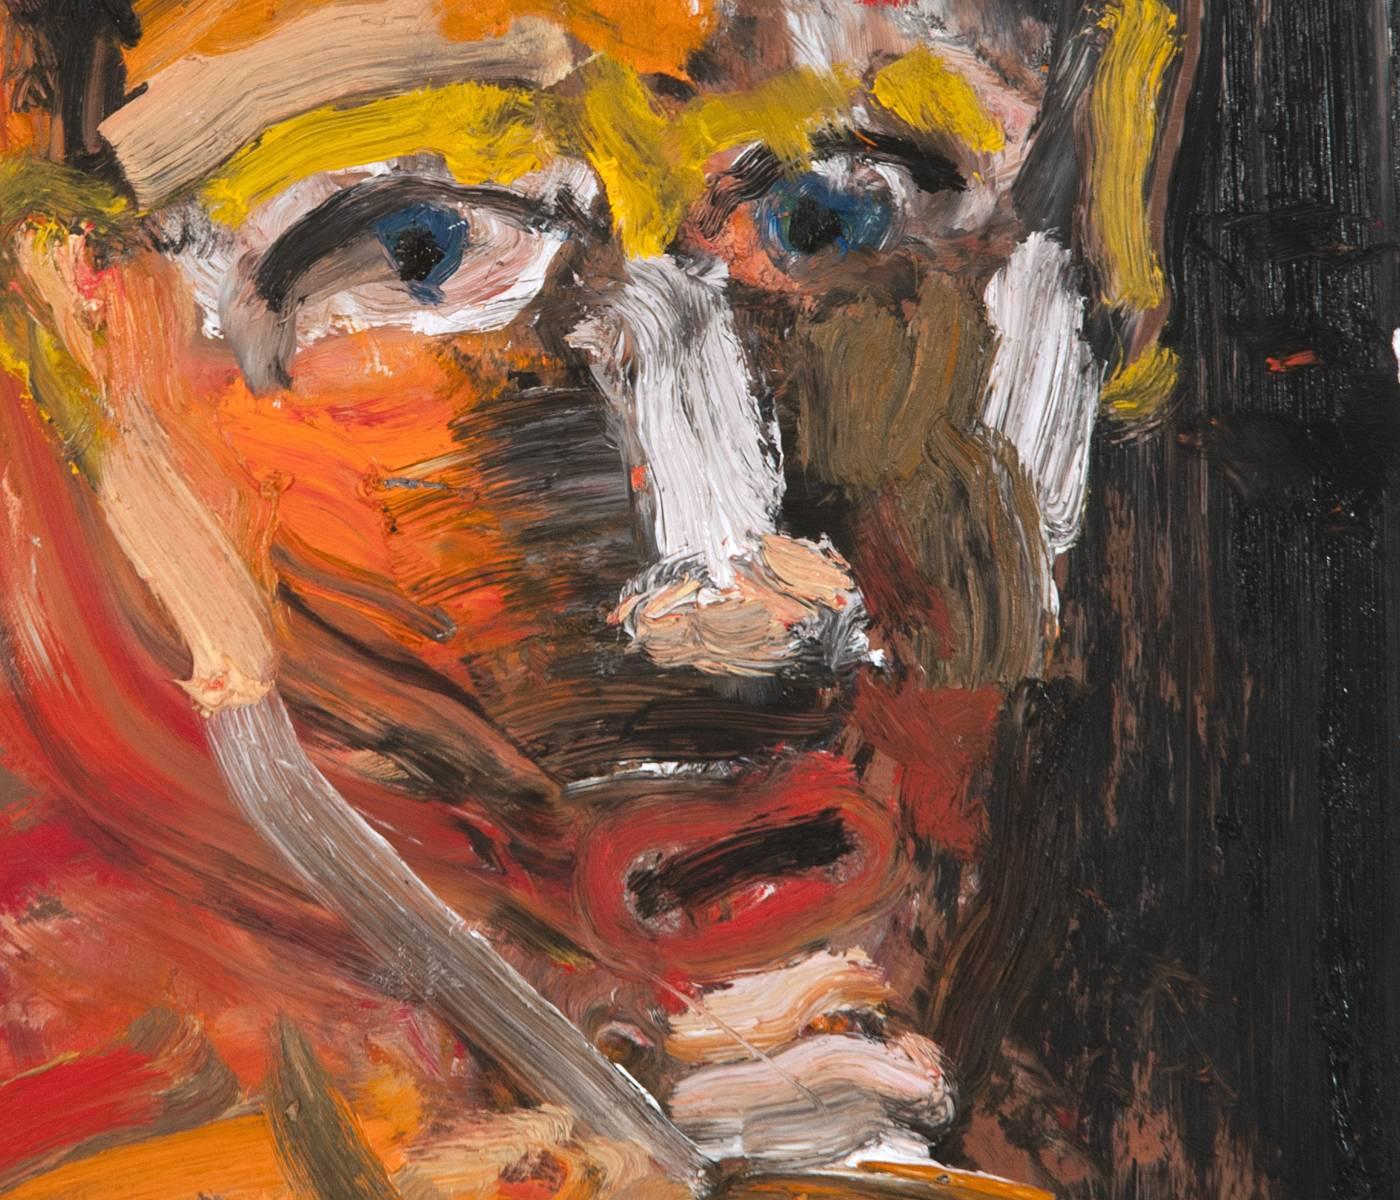 Michael Hafftka, One Who Doesn't Know How to Ask, expressionist portrait of man 1